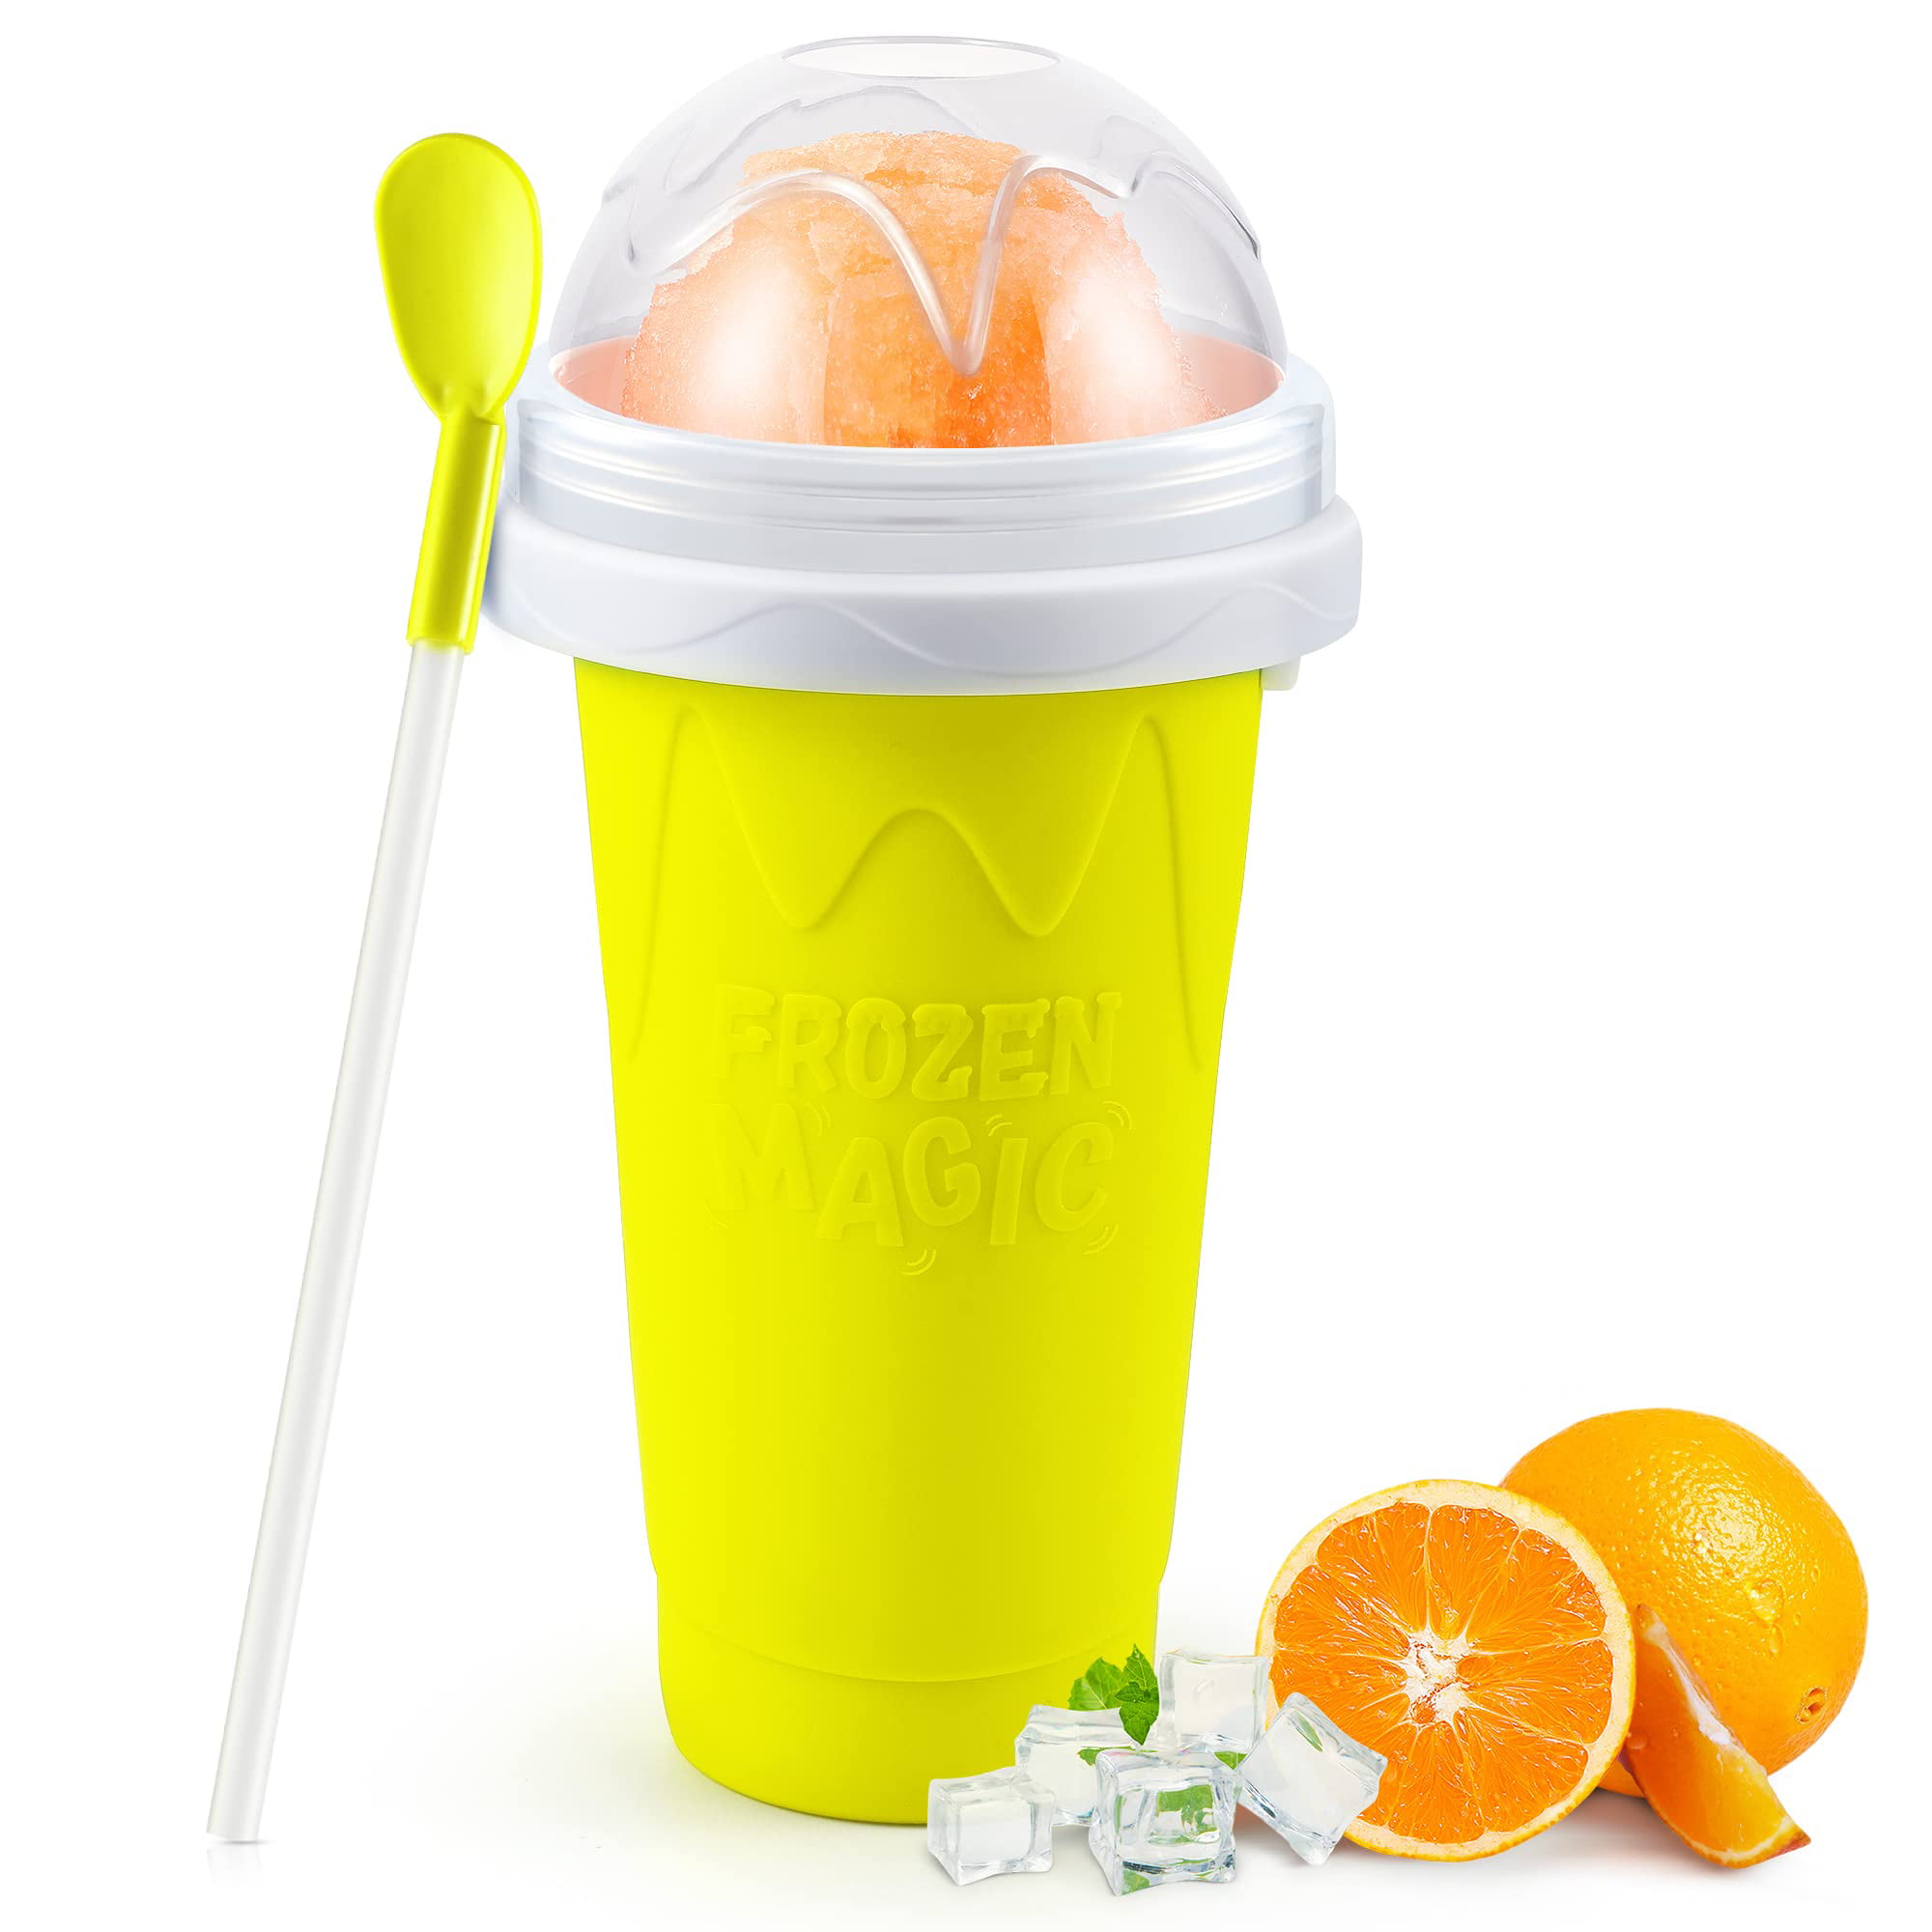 2PCS Slushie Maker Cup Magic Quick Frozen Smoothies Cup Double Layer Juice Cup Squeeze Silica Cup Cooling Cup Homemade Milk Shake Ice Cream Maker DIY it for Children and Family Yellow+red 